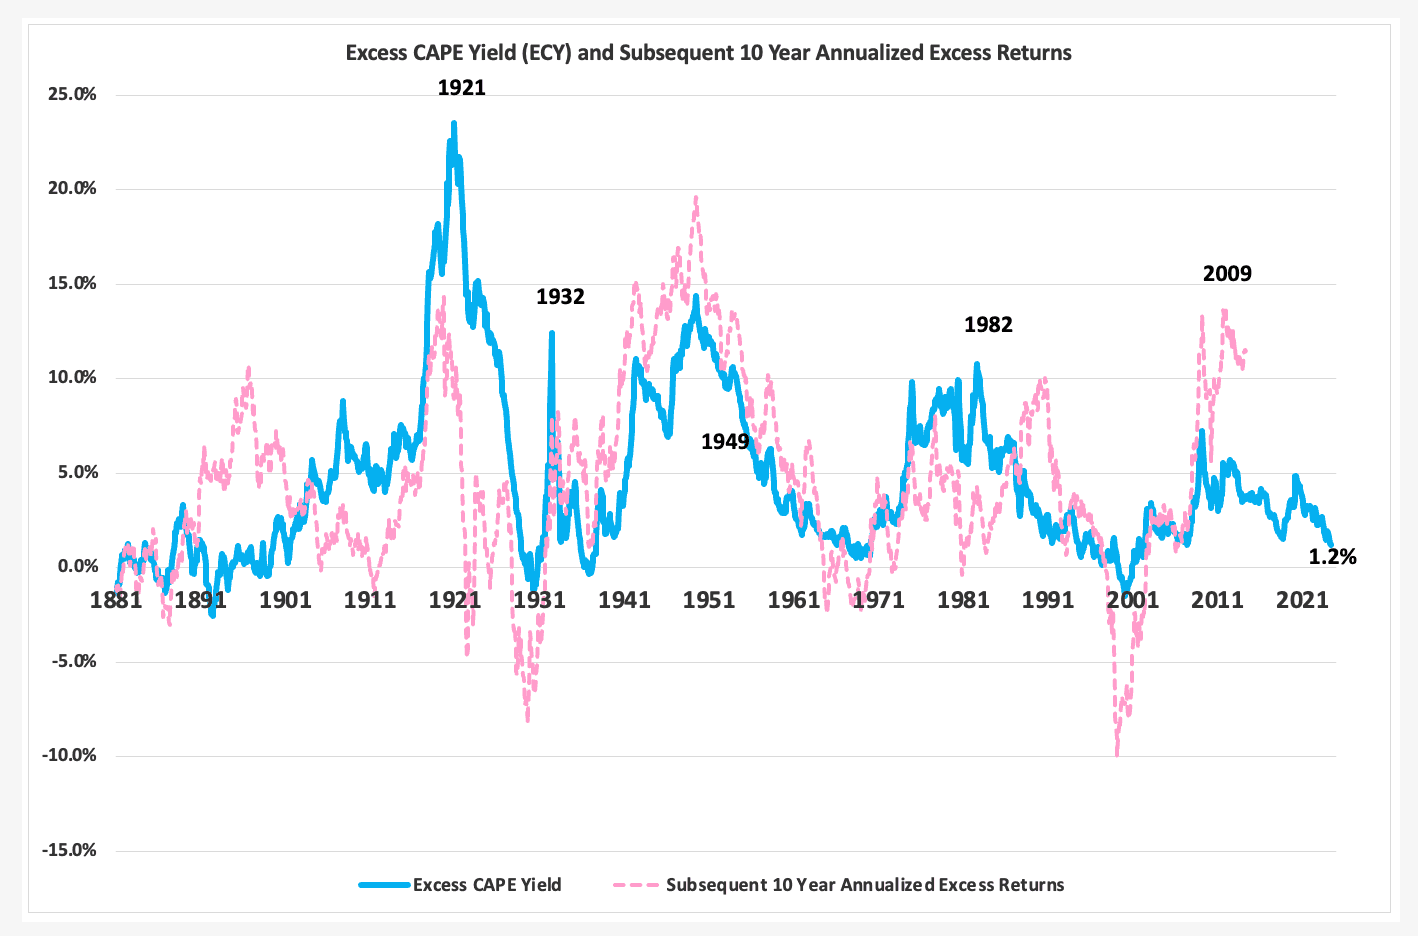 S&P 500 excess cape yield or risk premium close to all-time lows